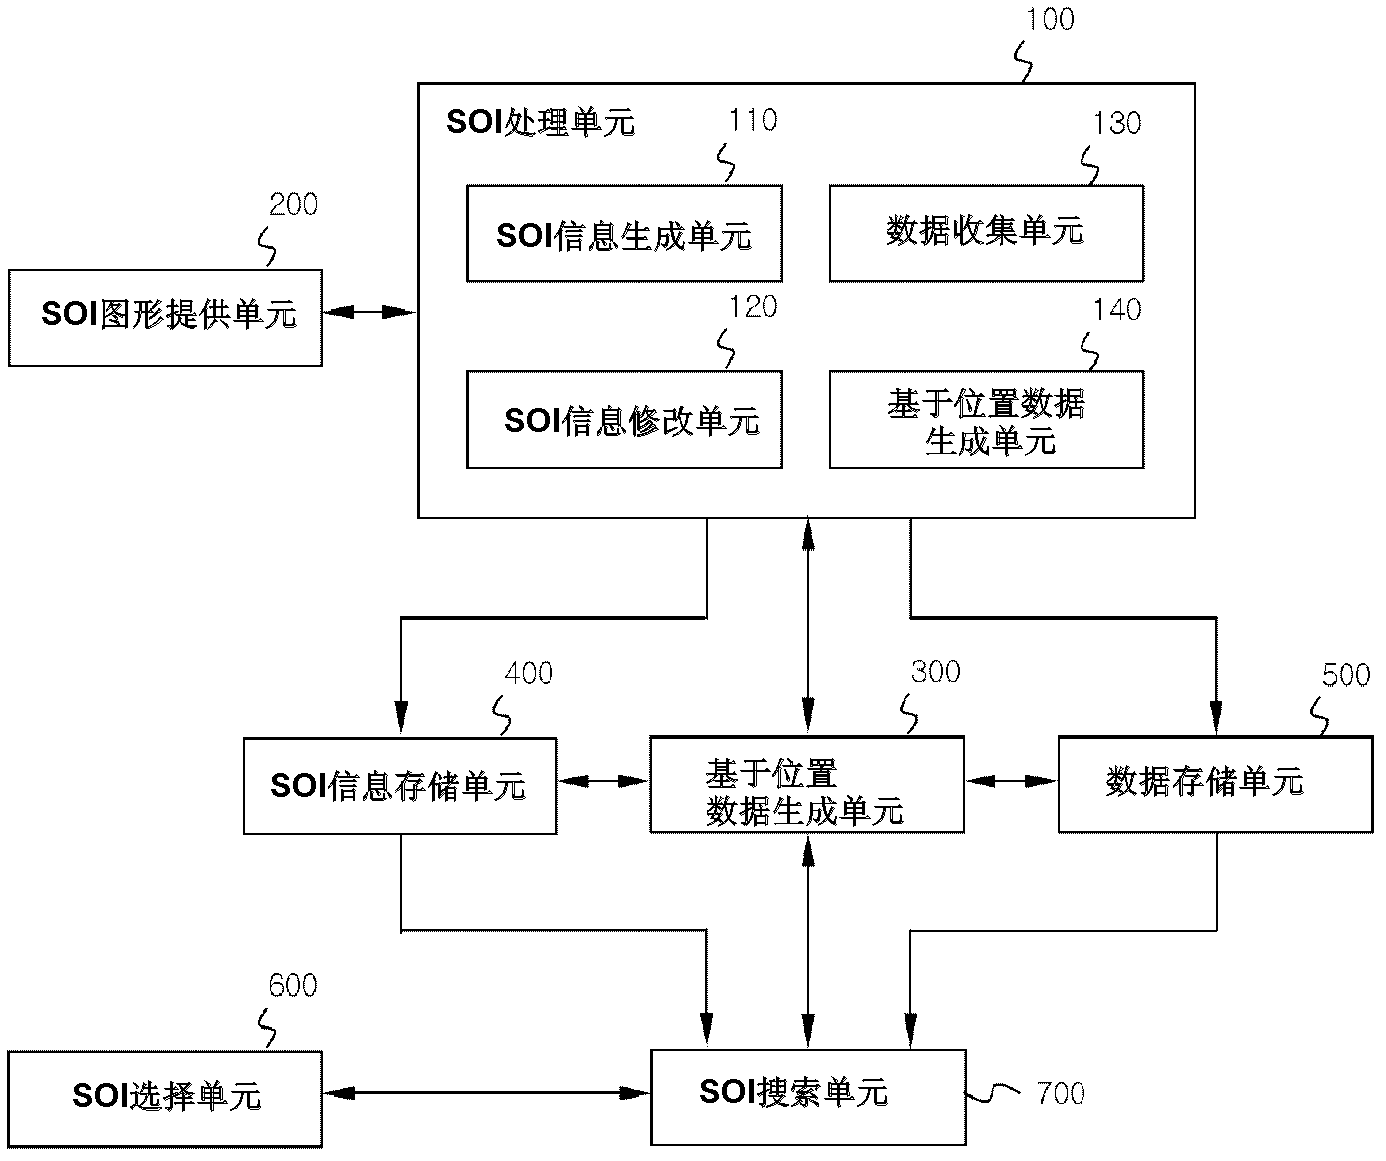 Location-based data service apparatus and method